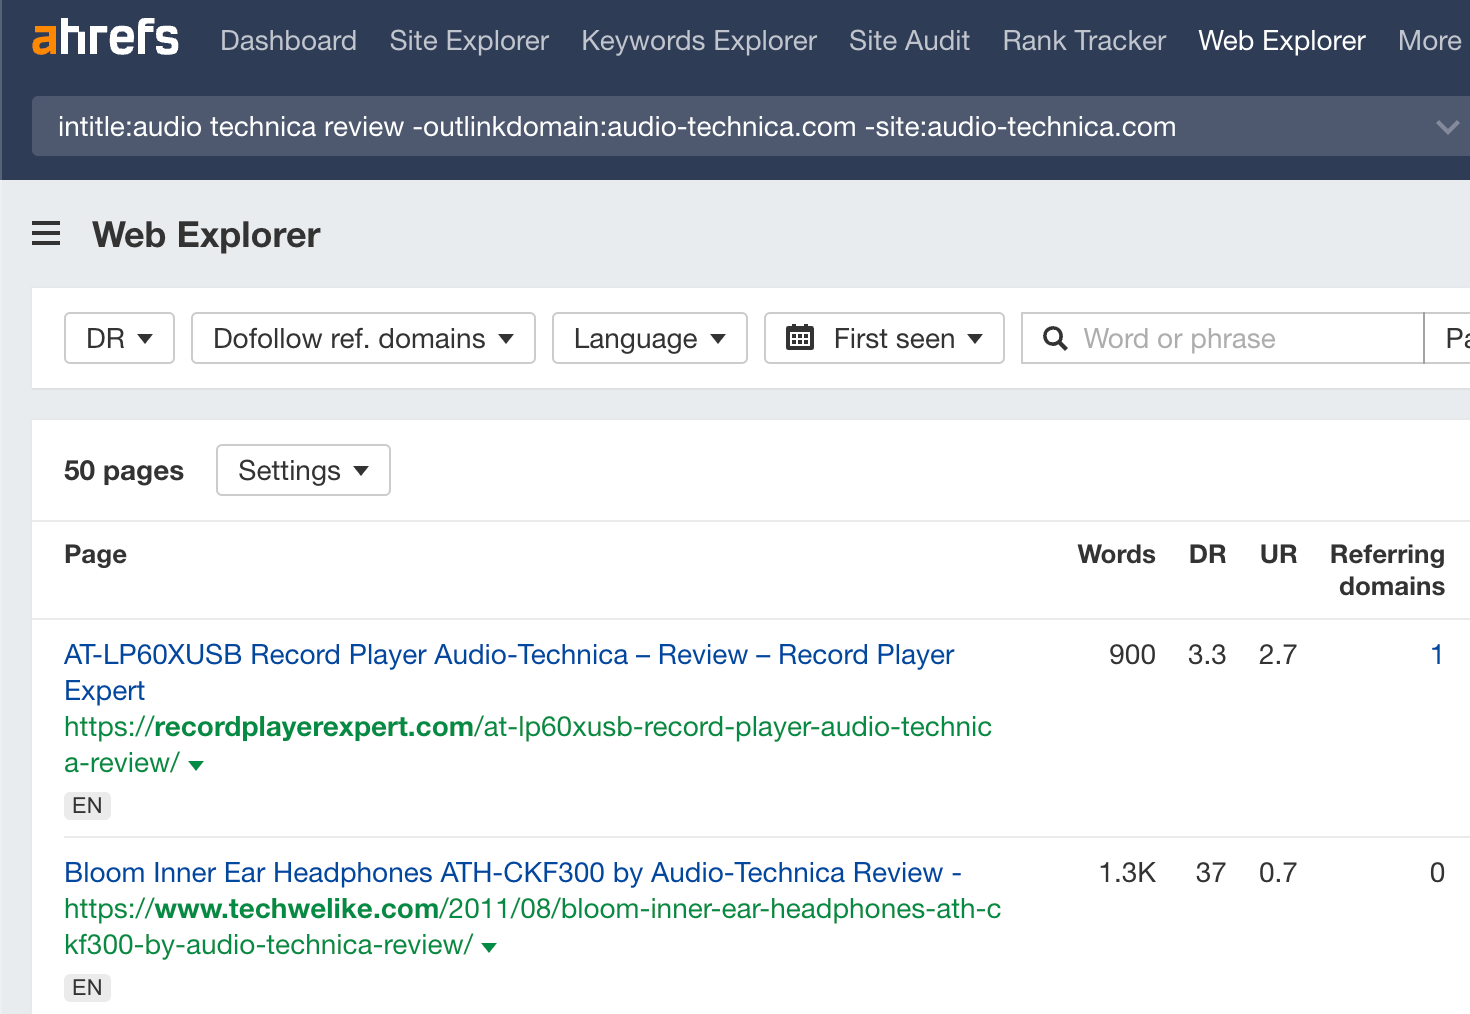 Finding unlinked reviews using Ahrefs' Web Explorer
